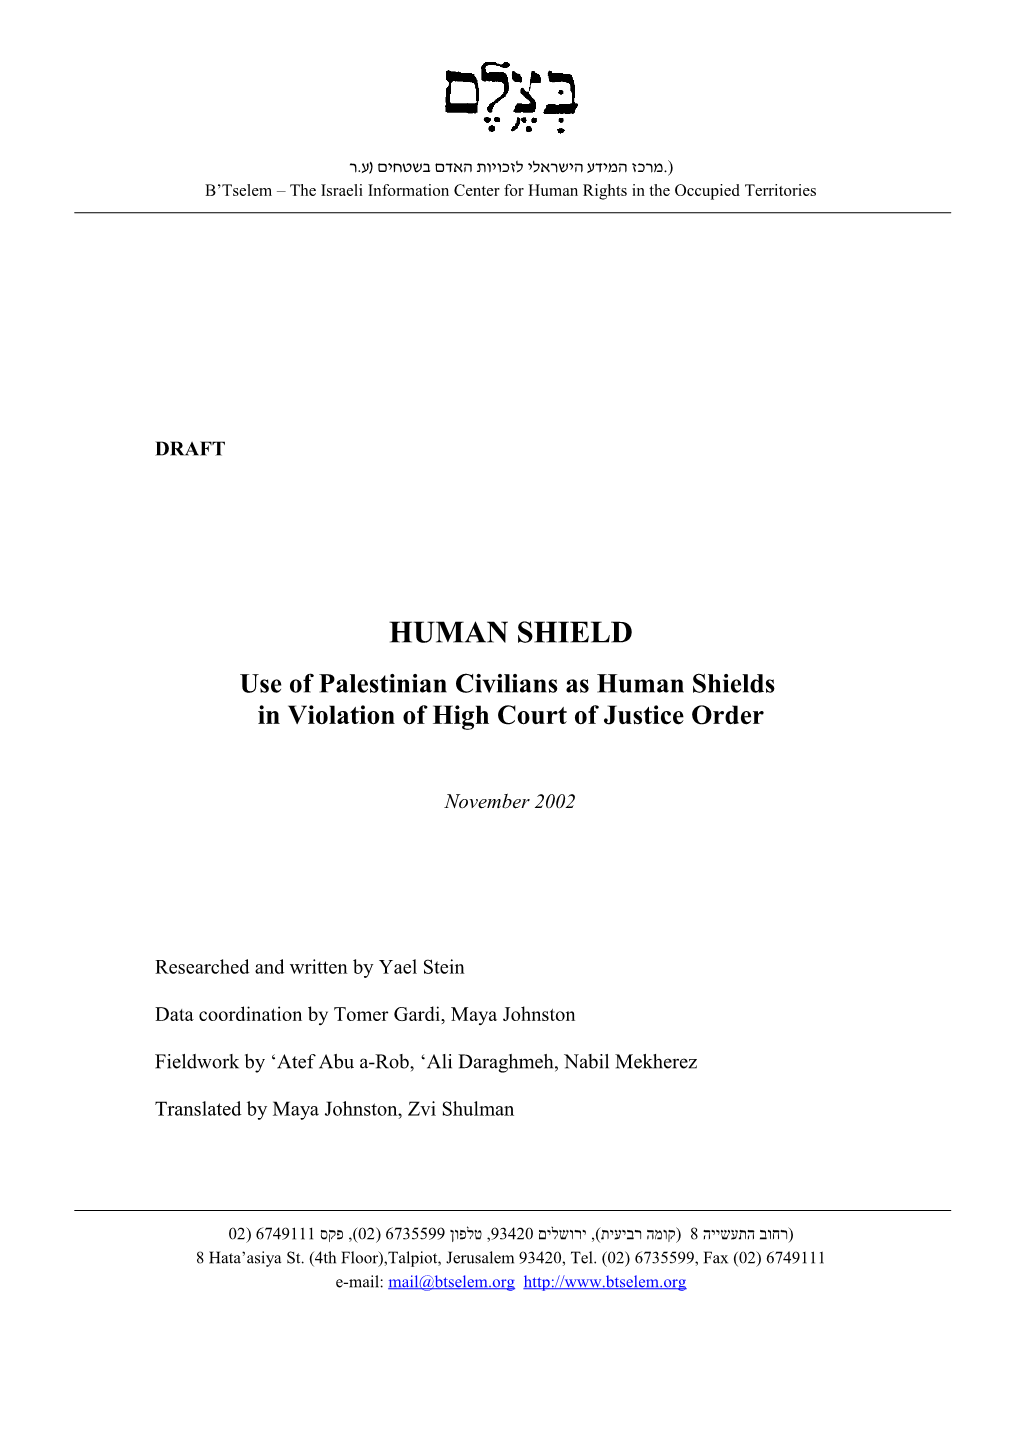 B'tselem Report: Use of Palestinian Civilians As Human Shields in Violation of High Court